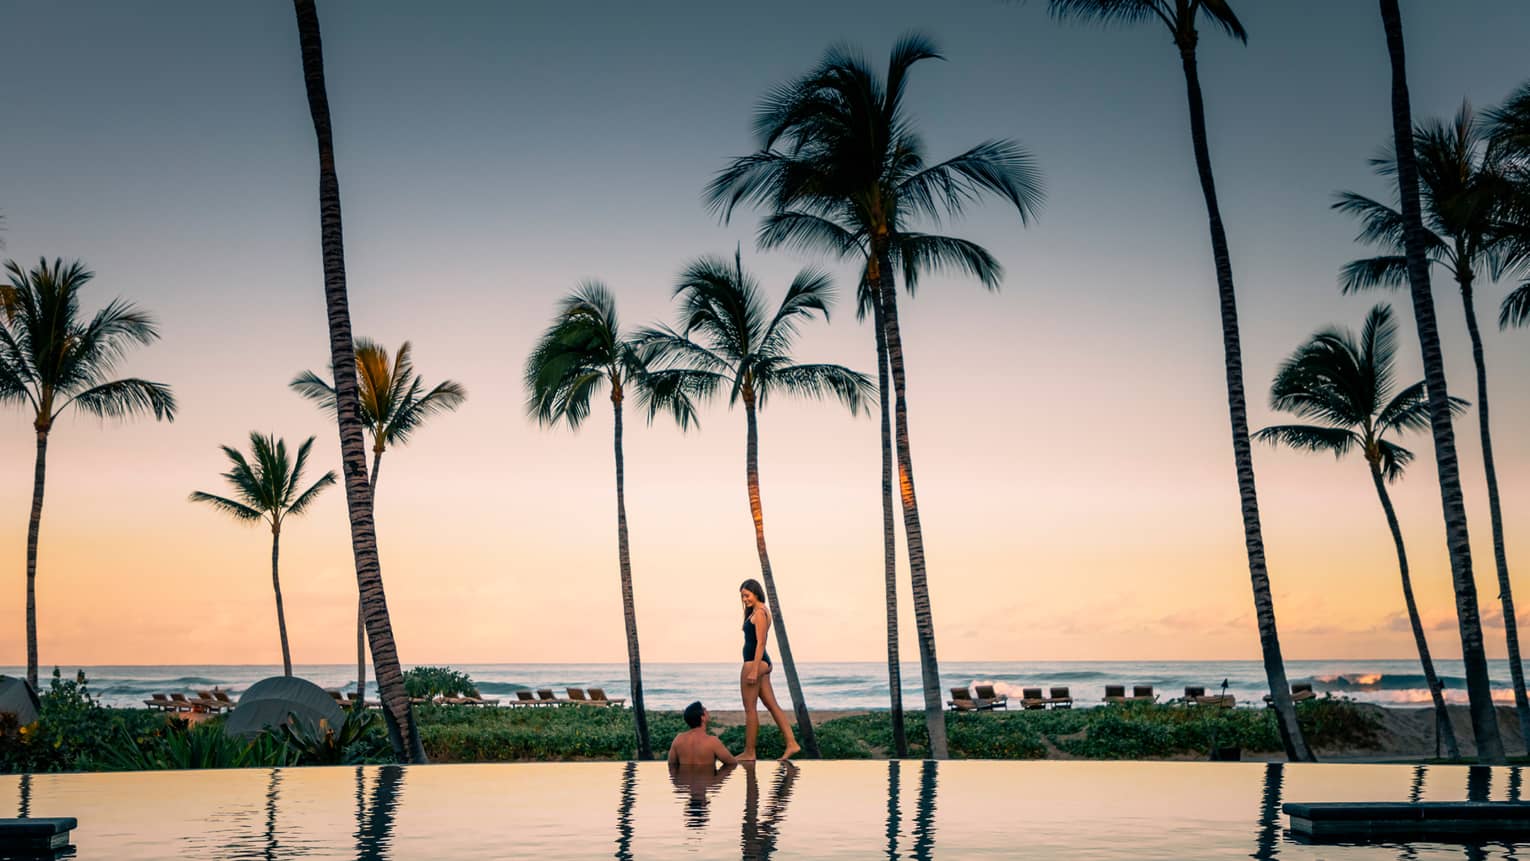 Woman in swimsuit walks on edge of pool past wading man, tall palm trees at sunset